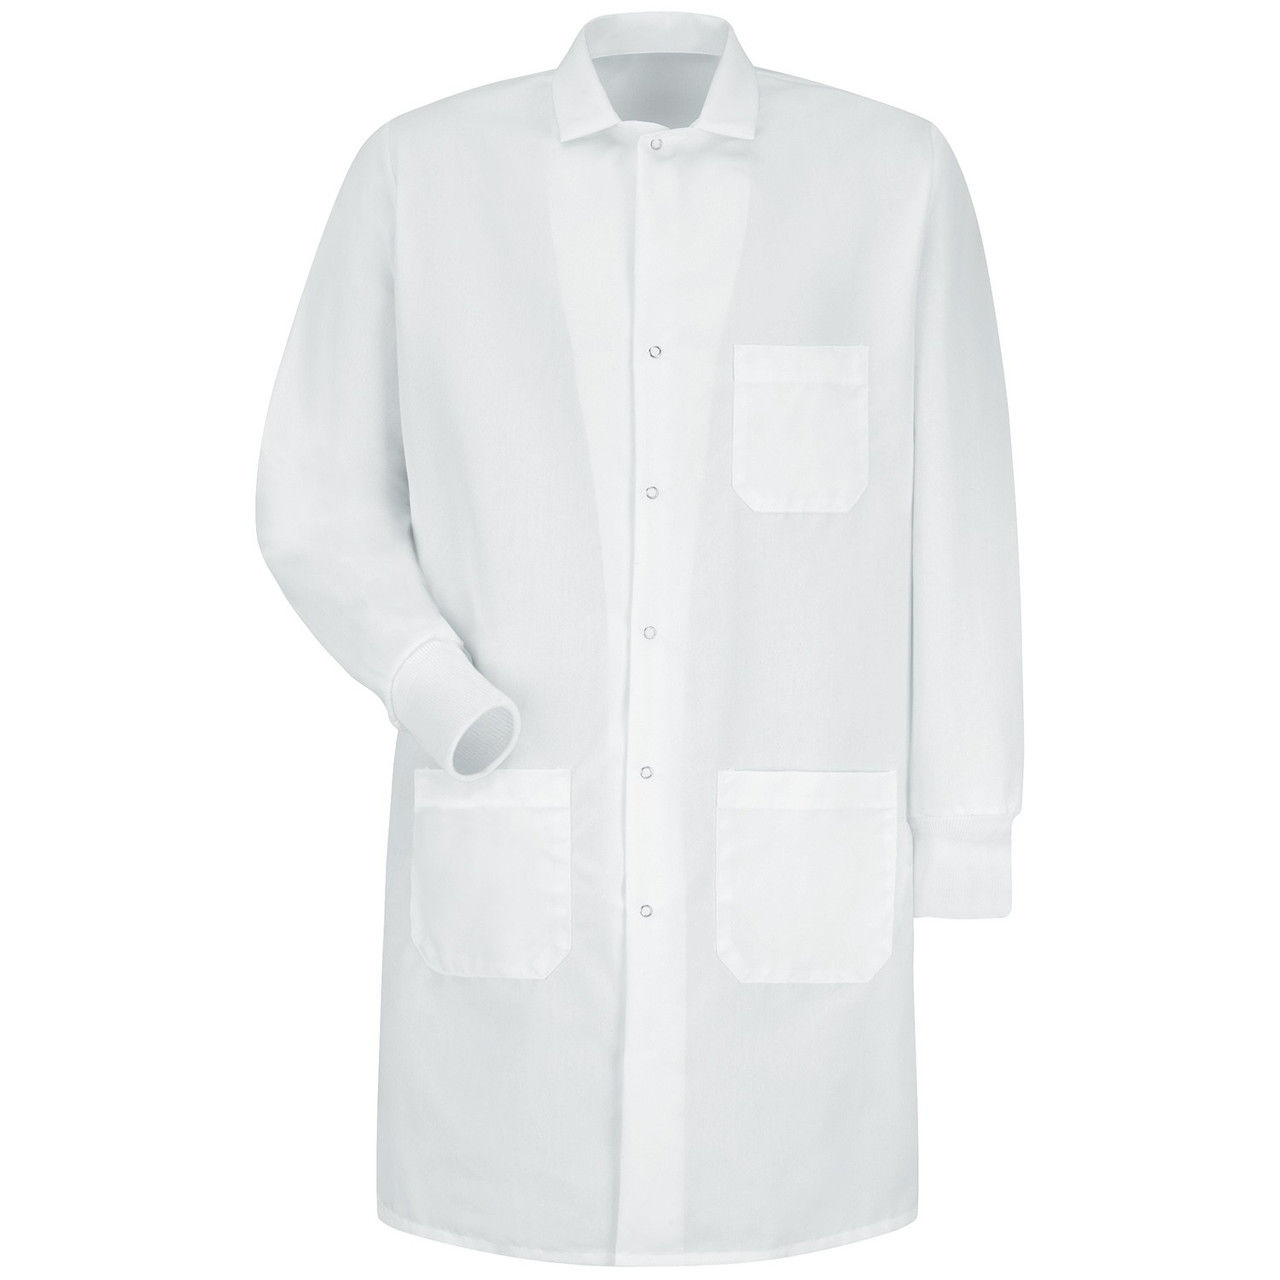 Where are Red Kap lab coats made?